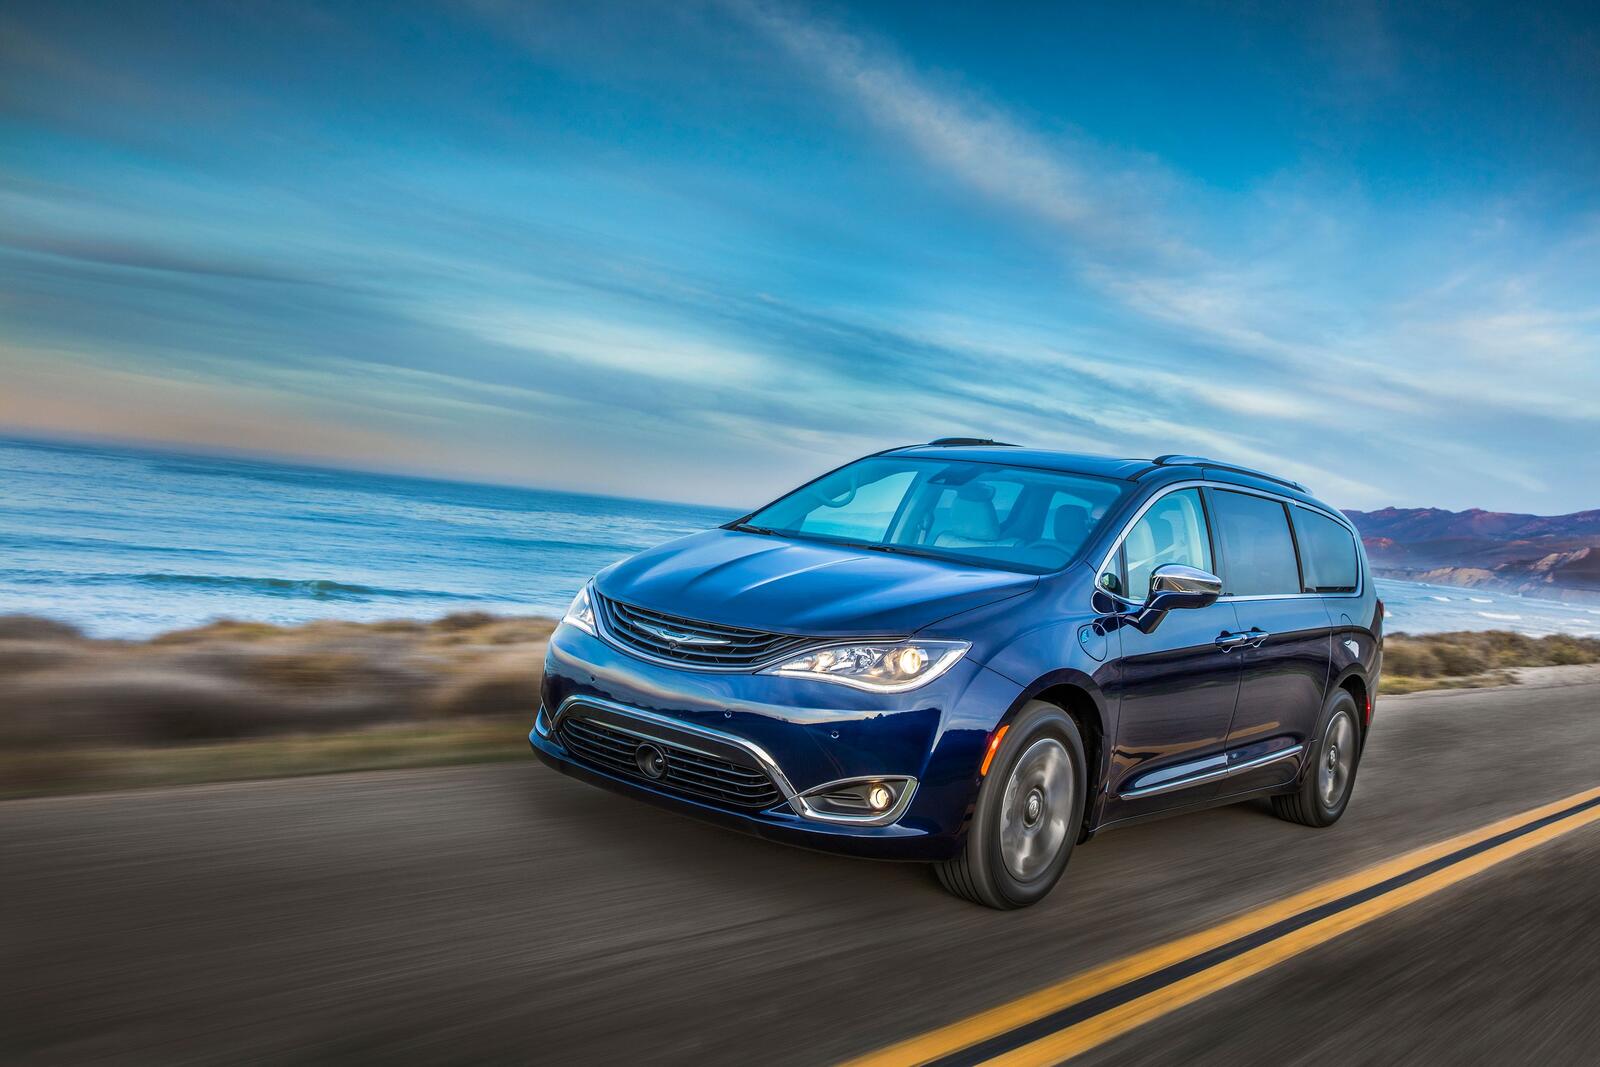 Wallpapers view from front Chrysler Pacifica Hybrid machine on the desktop